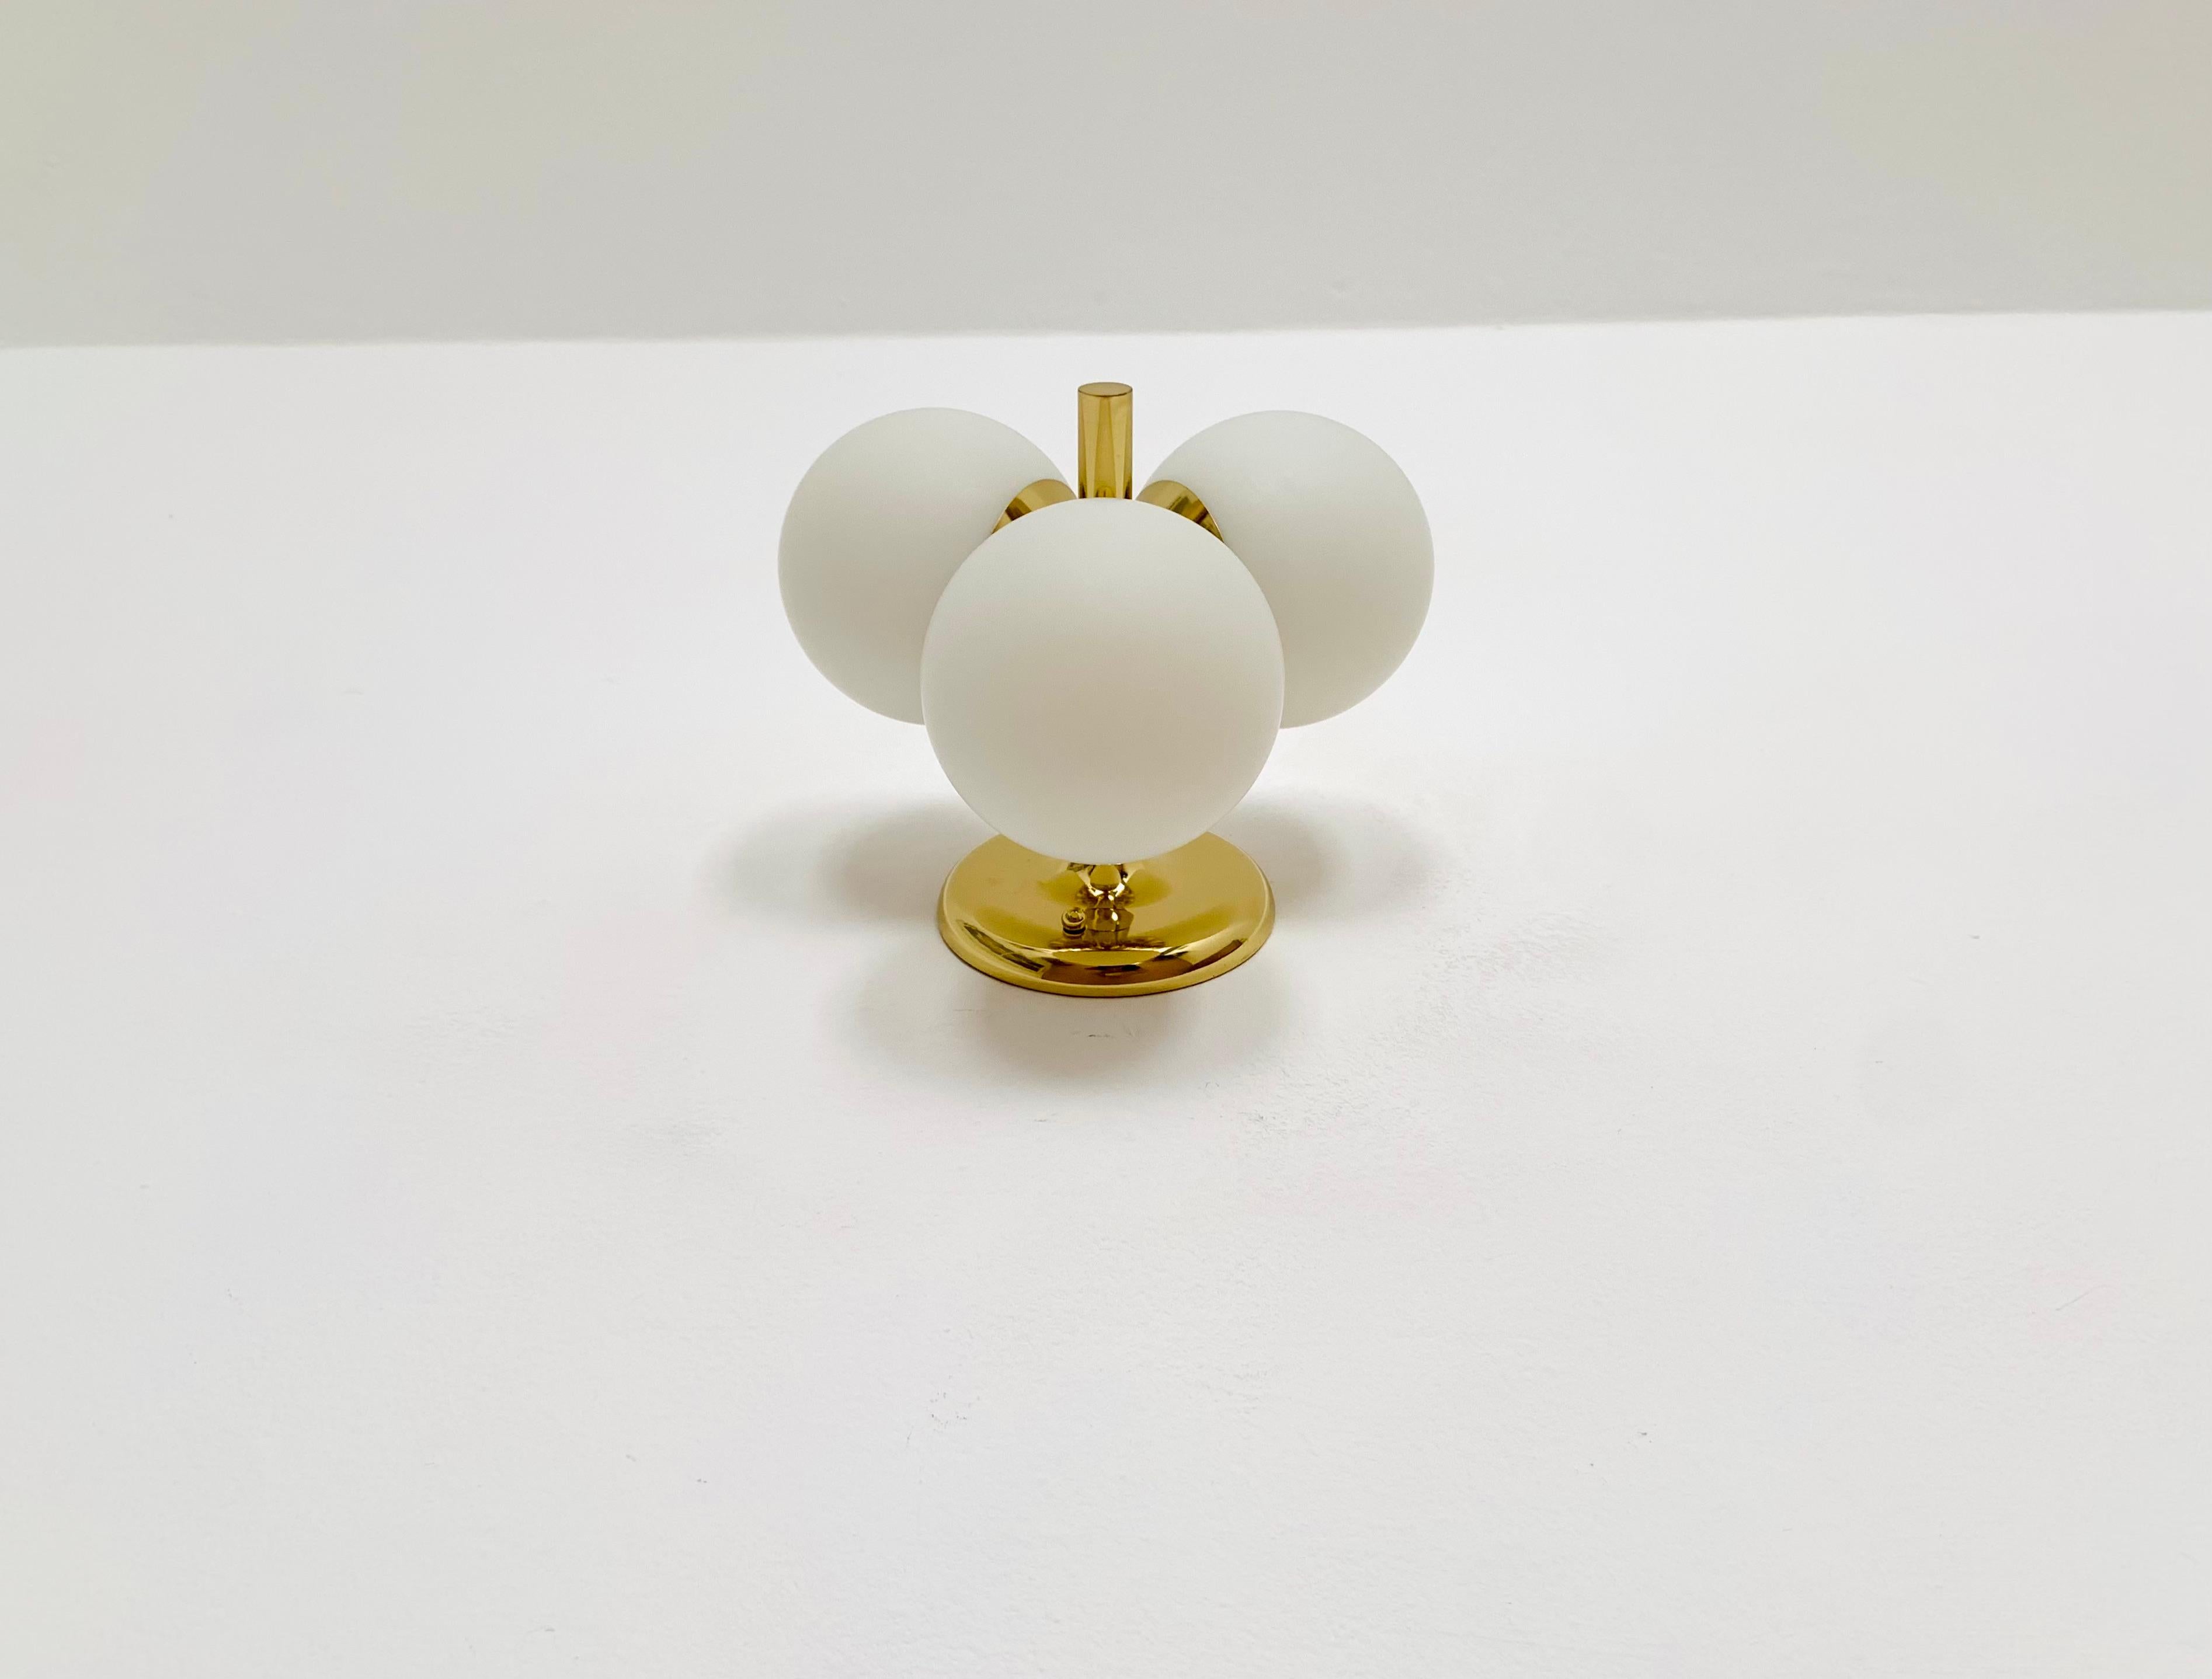 Beautiful Sputnik ceiling lamp from the 1960s.
The 3 opal glass lampshades spread a pleasant light.
The lamp has a very high quality finish.
Very contemporary design with a fantastic noble appearance.

Manufacturer: Kaiser Leuchten

Condition:

Very